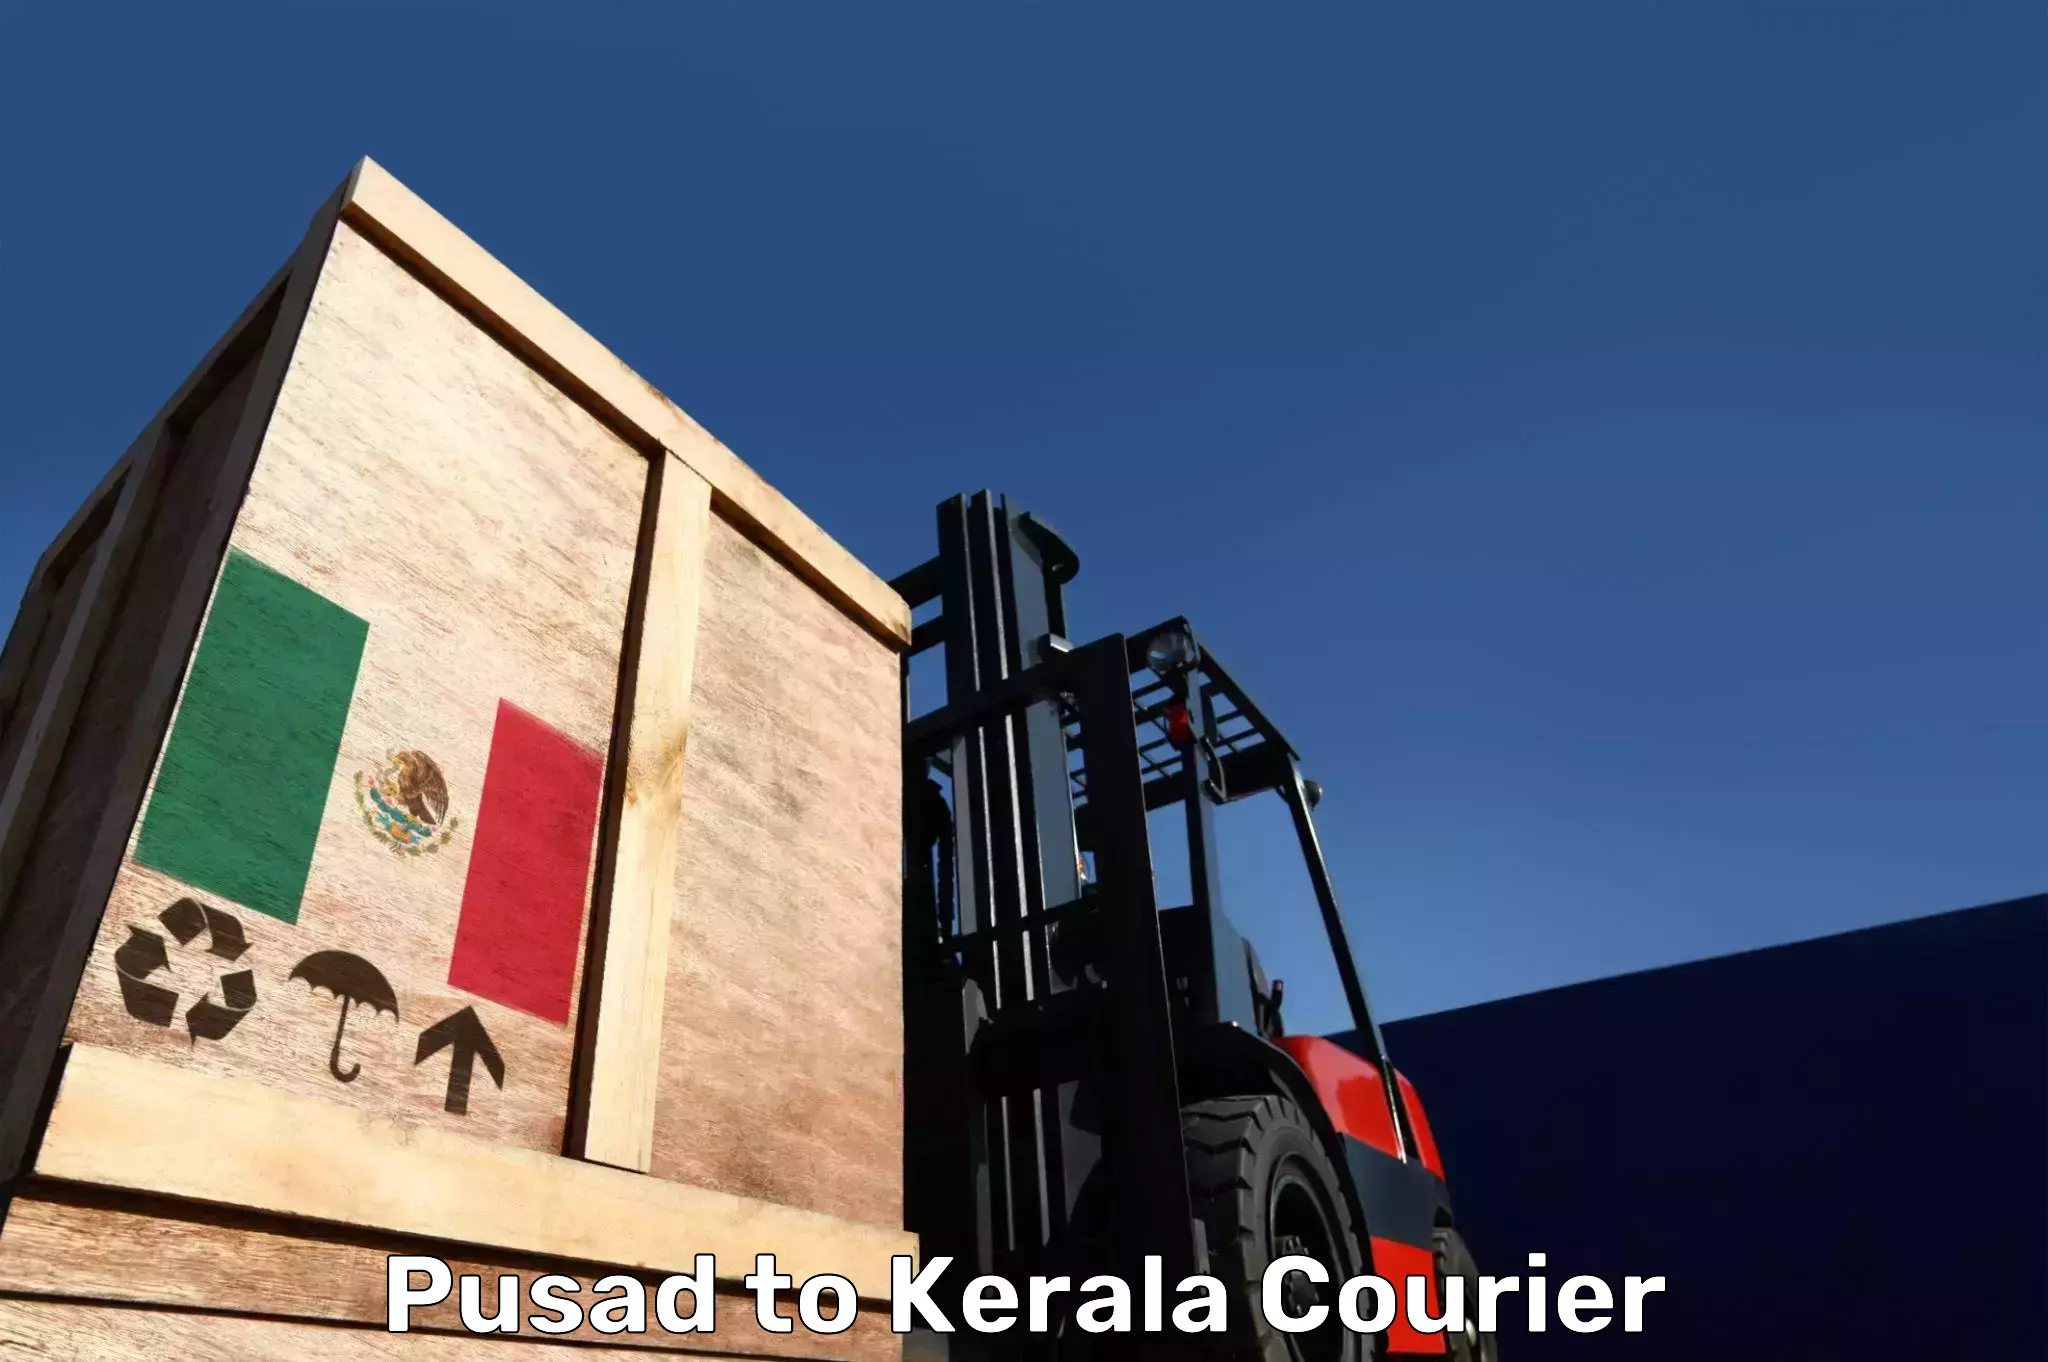 Baggage relocation service in Pusad to Kochi